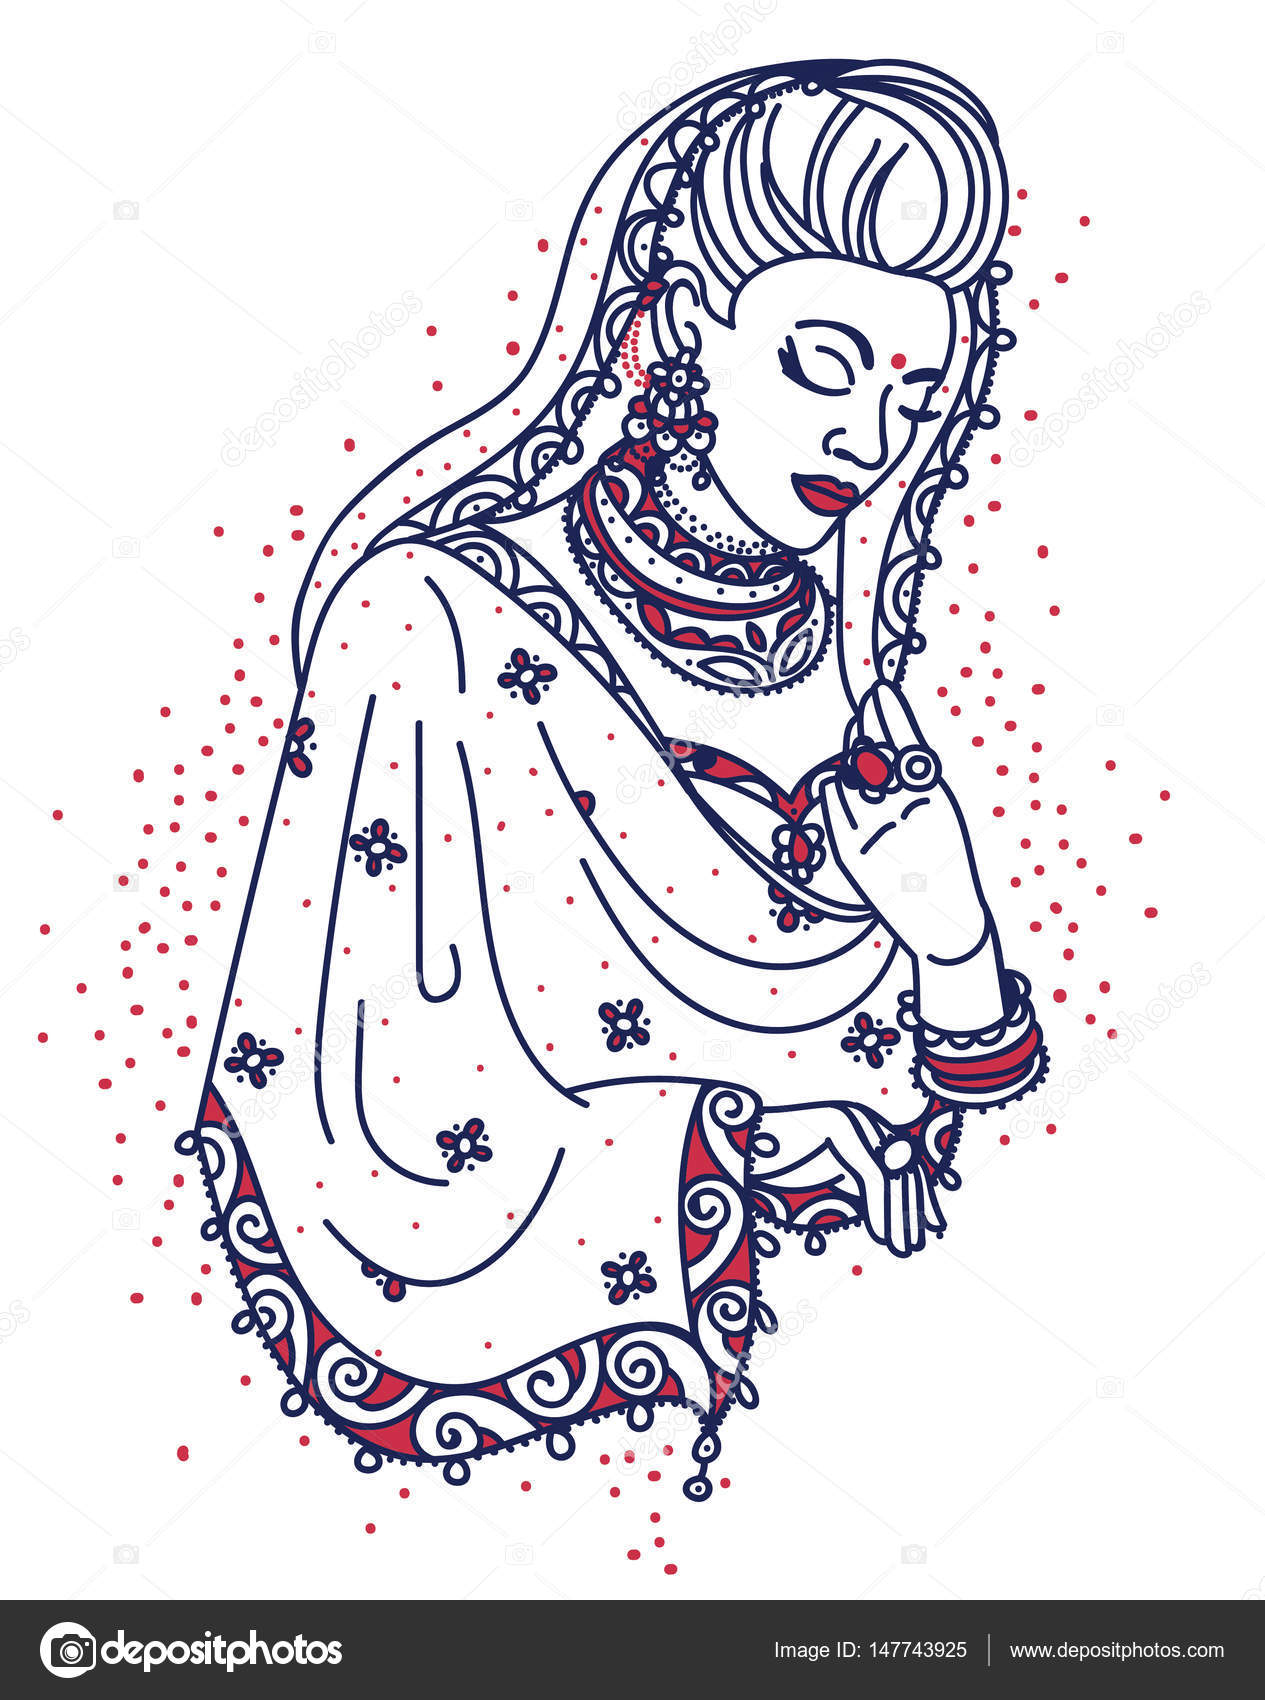 How to draw Girl wearing saree |beautiful traditional girl drawing for... |  TikTok